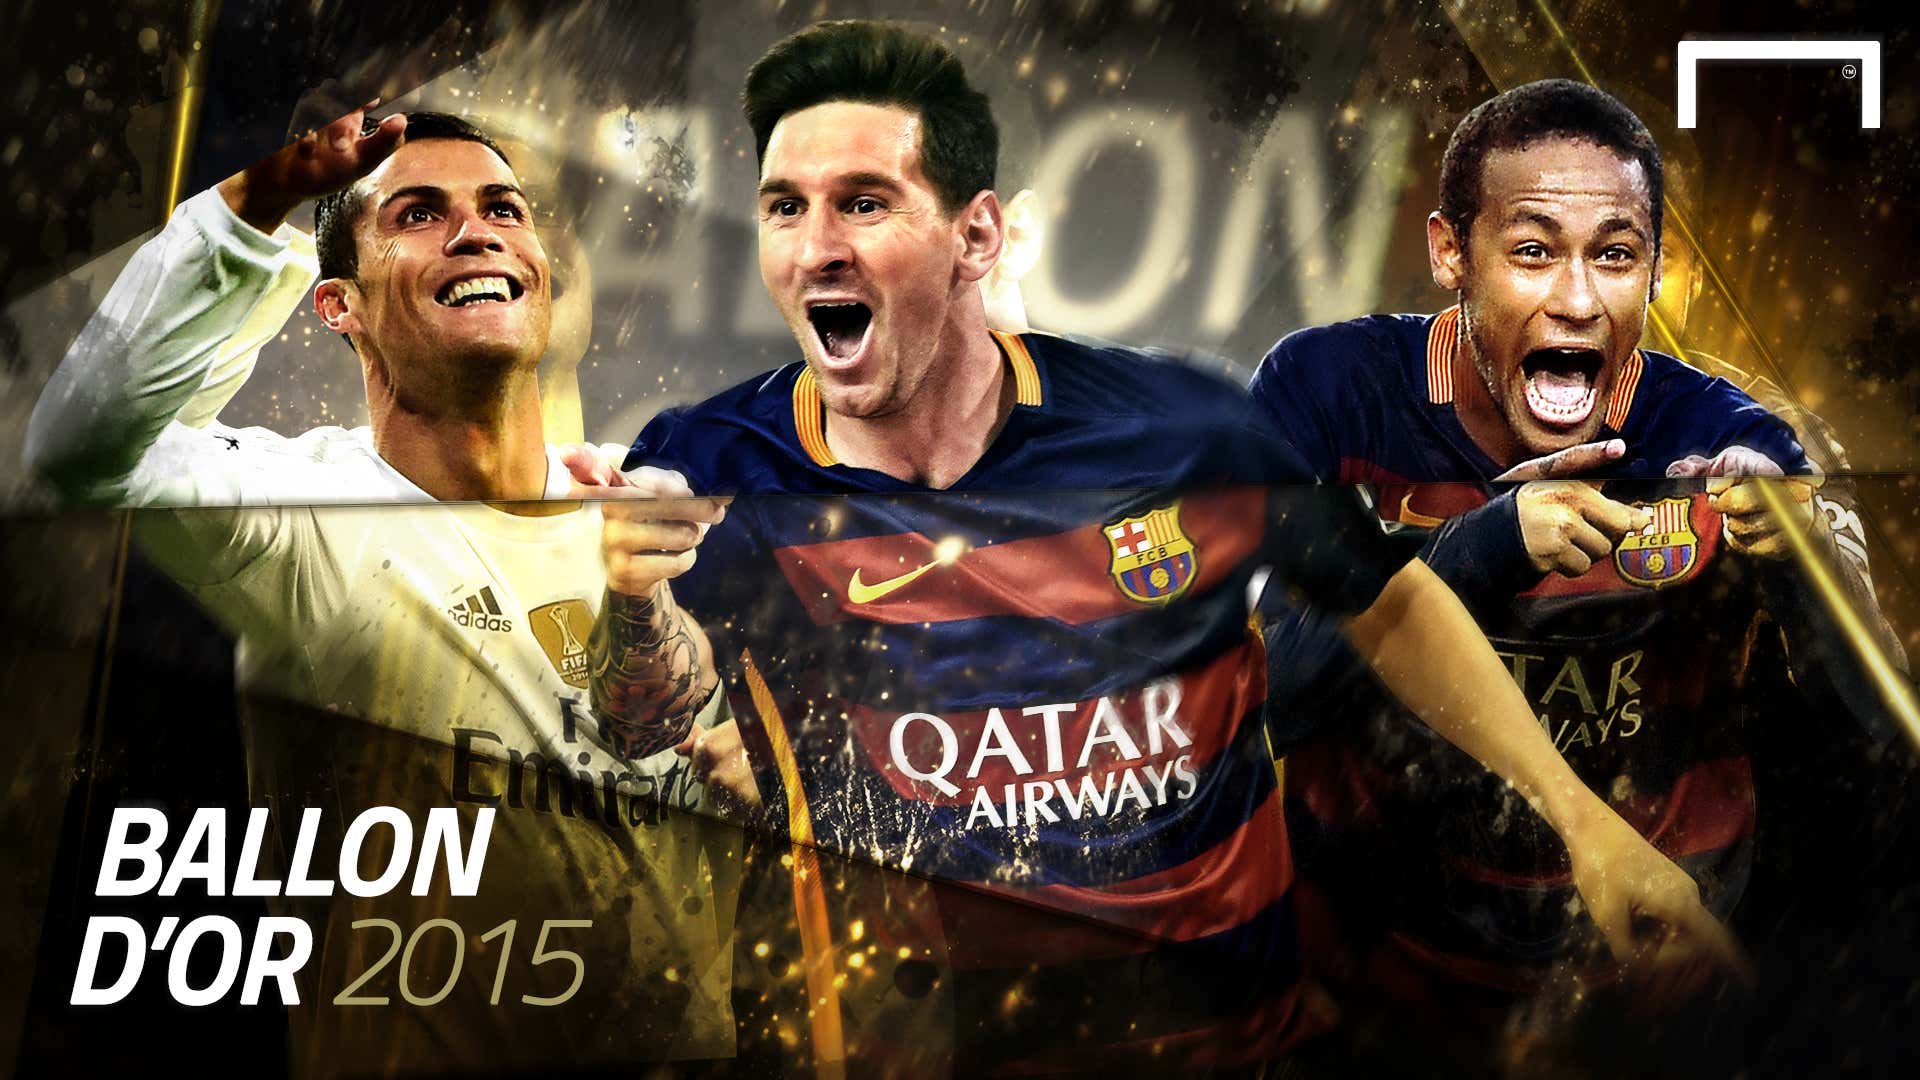 Messi at the top, Lewandowski almost on the podium: the Ballon d'Or's complete rankings